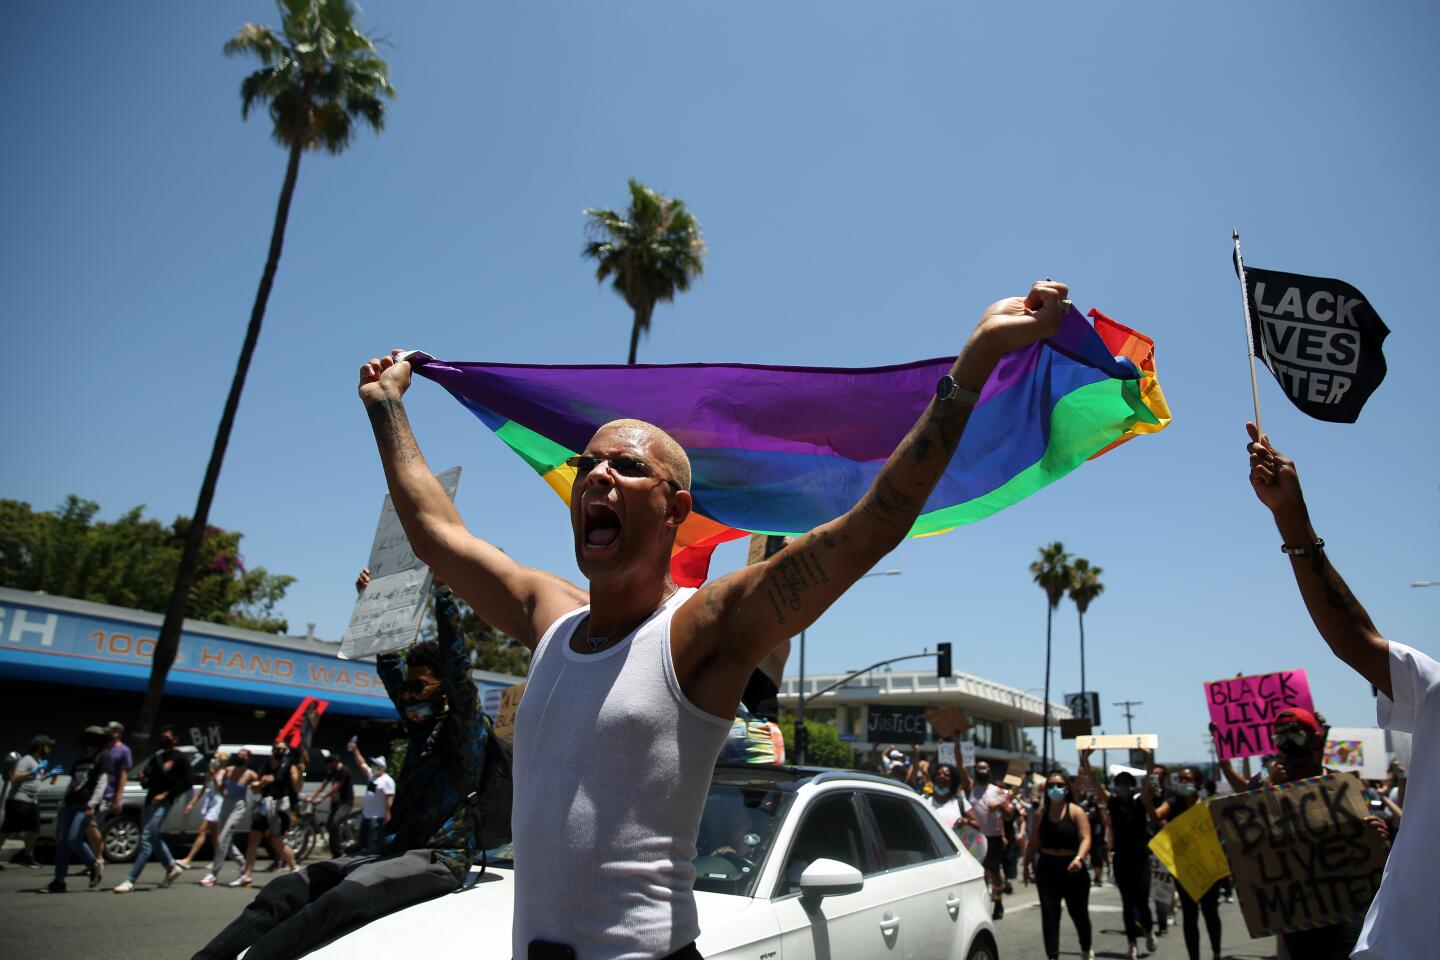 A protester waves a rainbow flag on Sunset Boulevard during All Black Lives Matter march